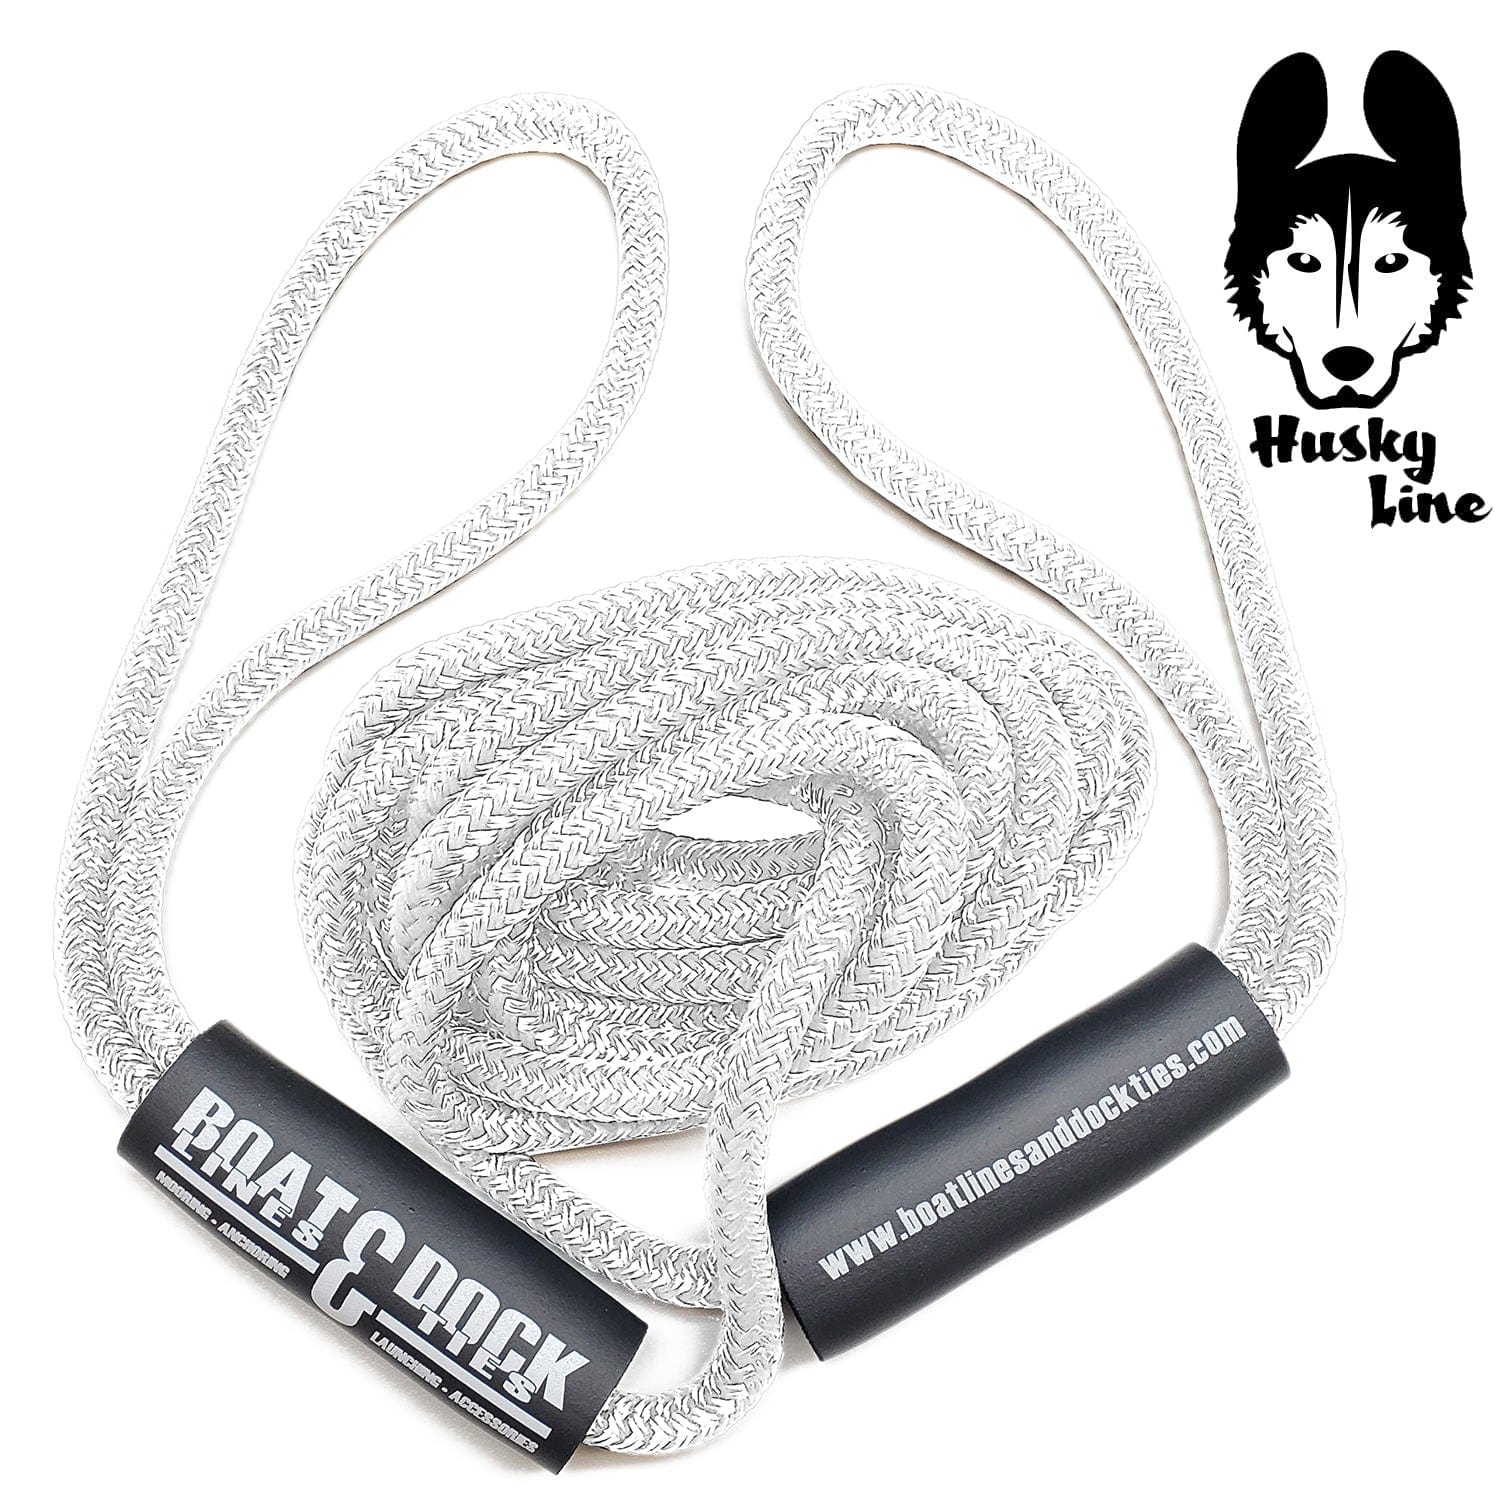 Boat Throw Rope- "Husky Line" 2 Loop Double Braided Nylon Rope, Stitched Loops and Floats - Boat Lines & Dock Ties Boat Lines & Dock Ties 10' / White